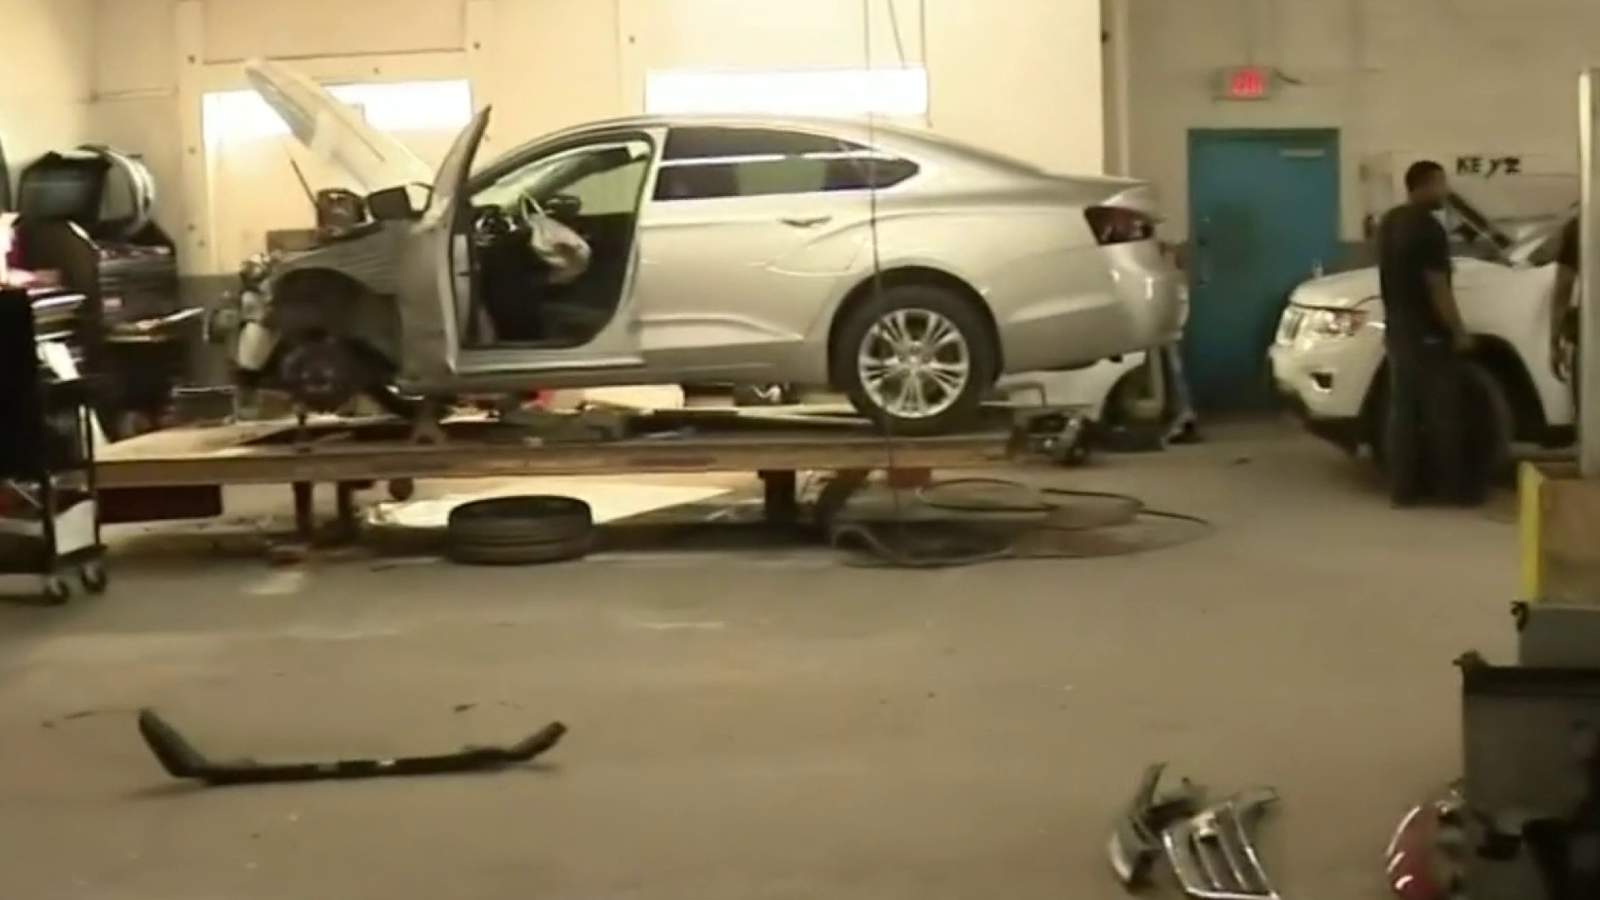 At least 20 stolen cars found as police raid suspected chop shop on Detroits west side